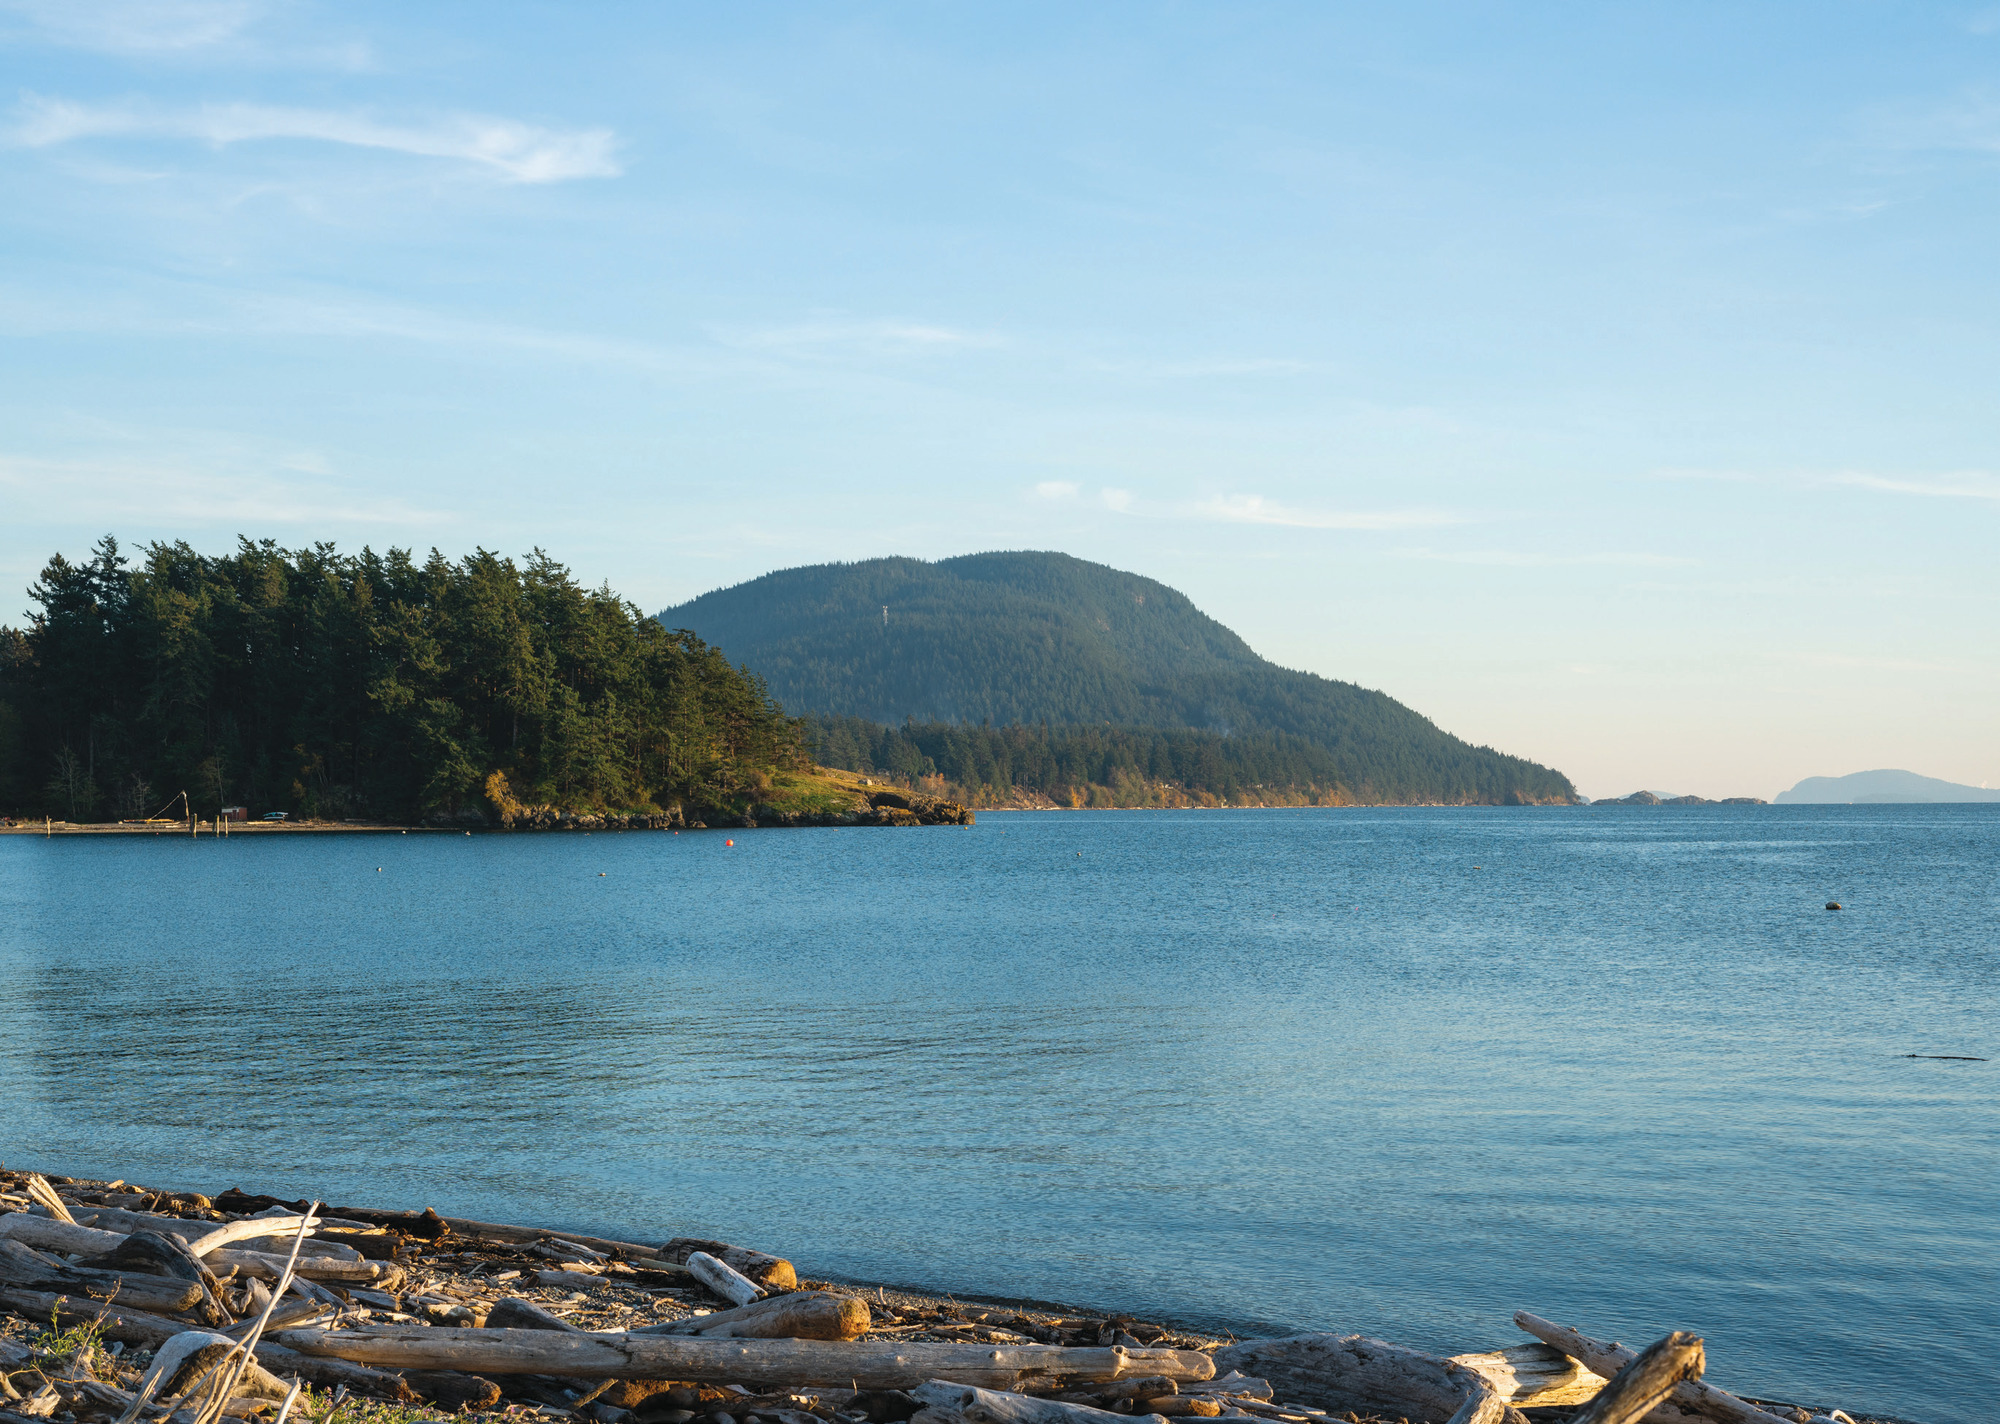 The austere beauty of Lummi Island caters to lovers and hikers.